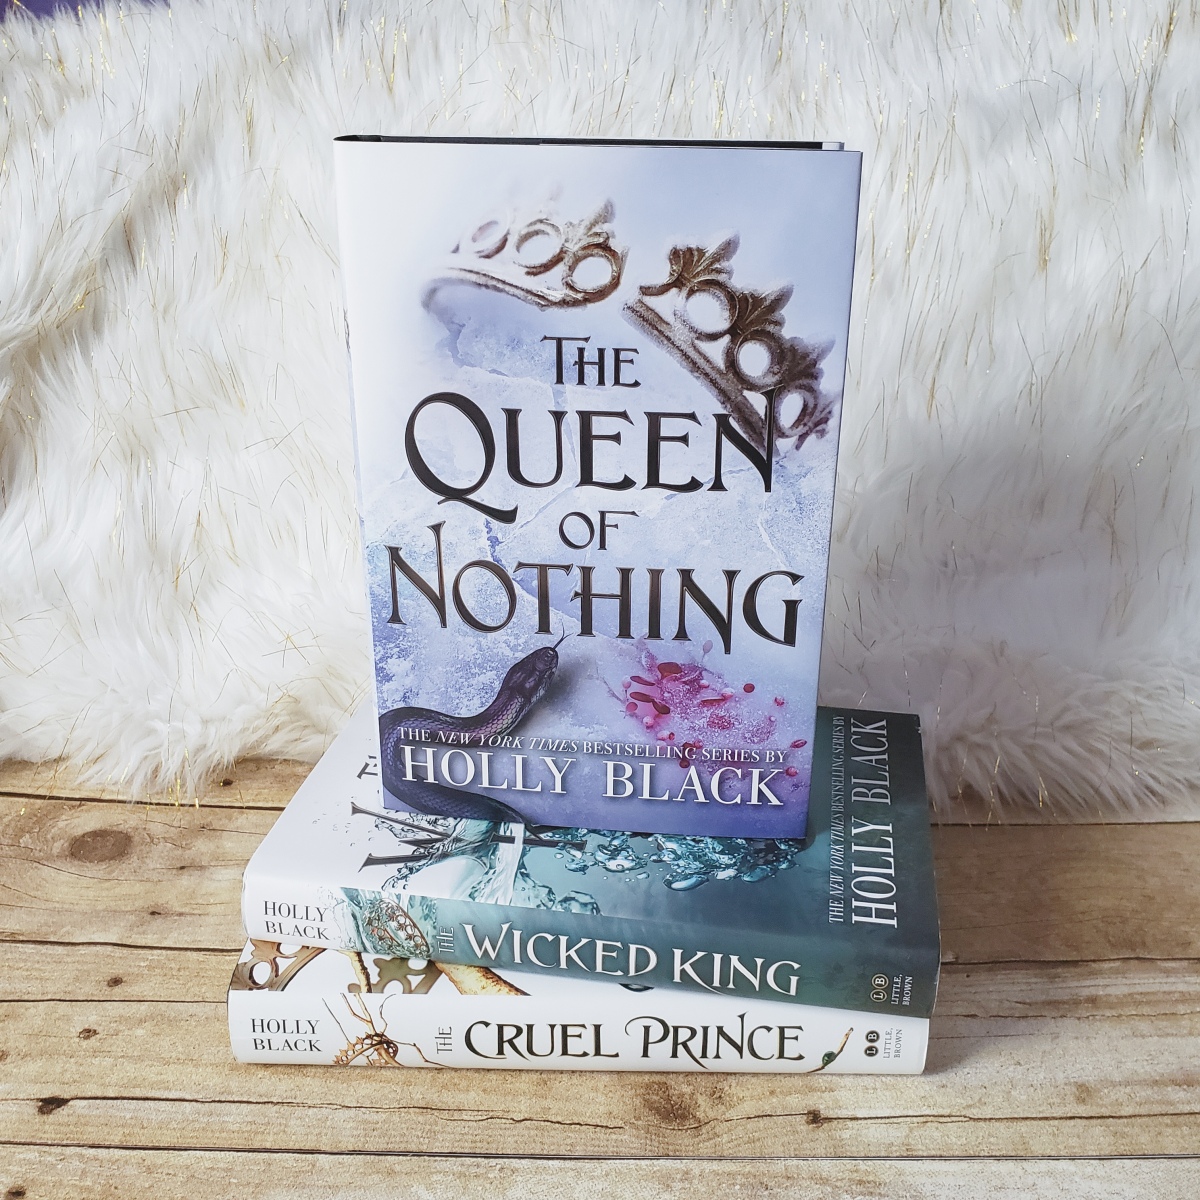 The Queen of Nothing (The Folk of Air #3) by Holly Black